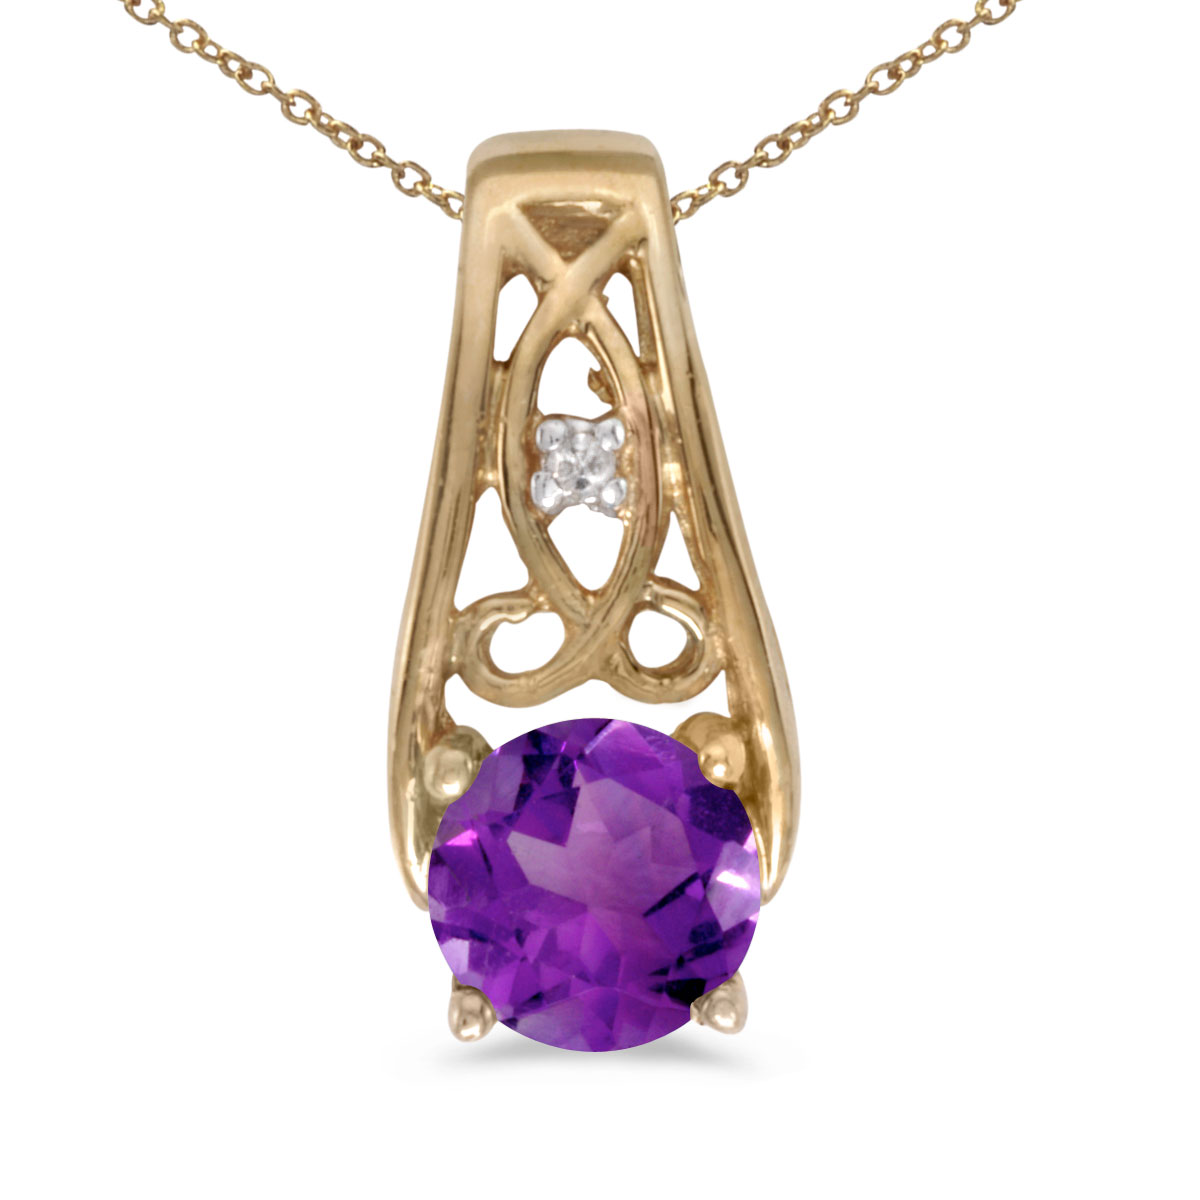 10k Yellow Gold Round Amethyst And Diamond Pendant with 18" Chain - image 1 of 3